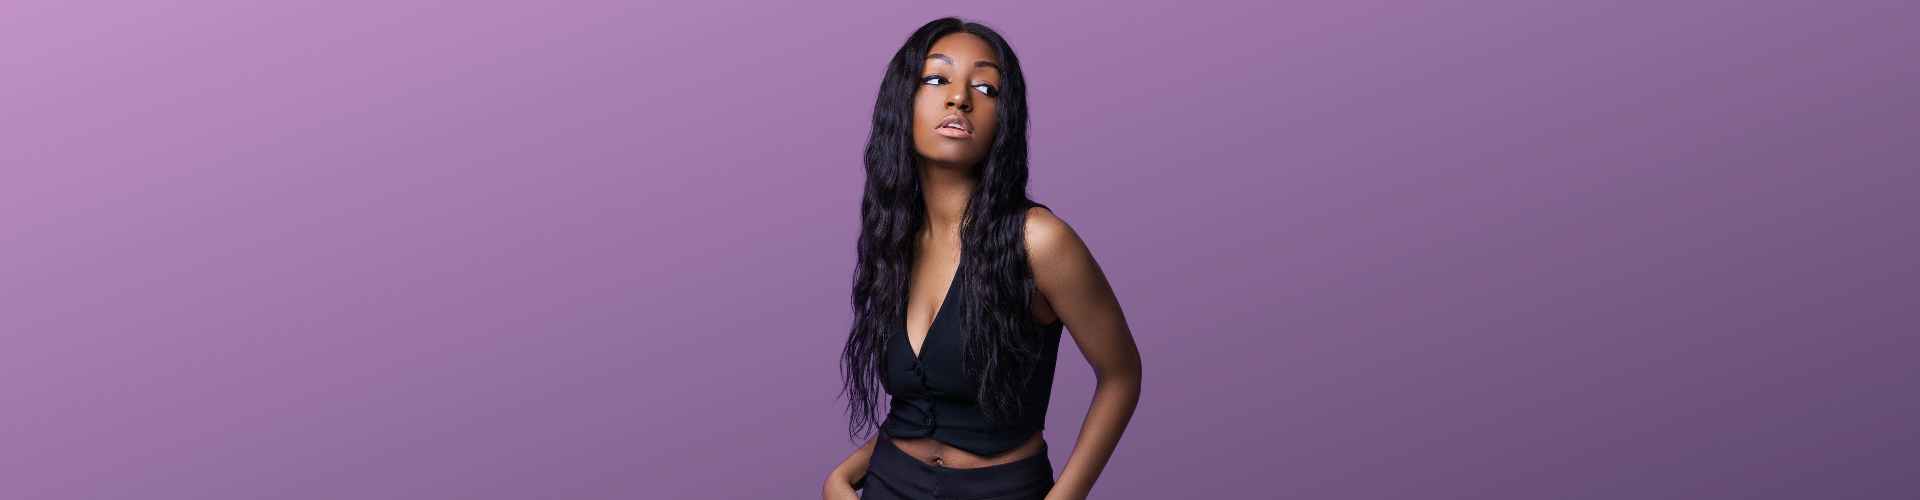 Yasmine Benoit in a black top and trousers against a purple background